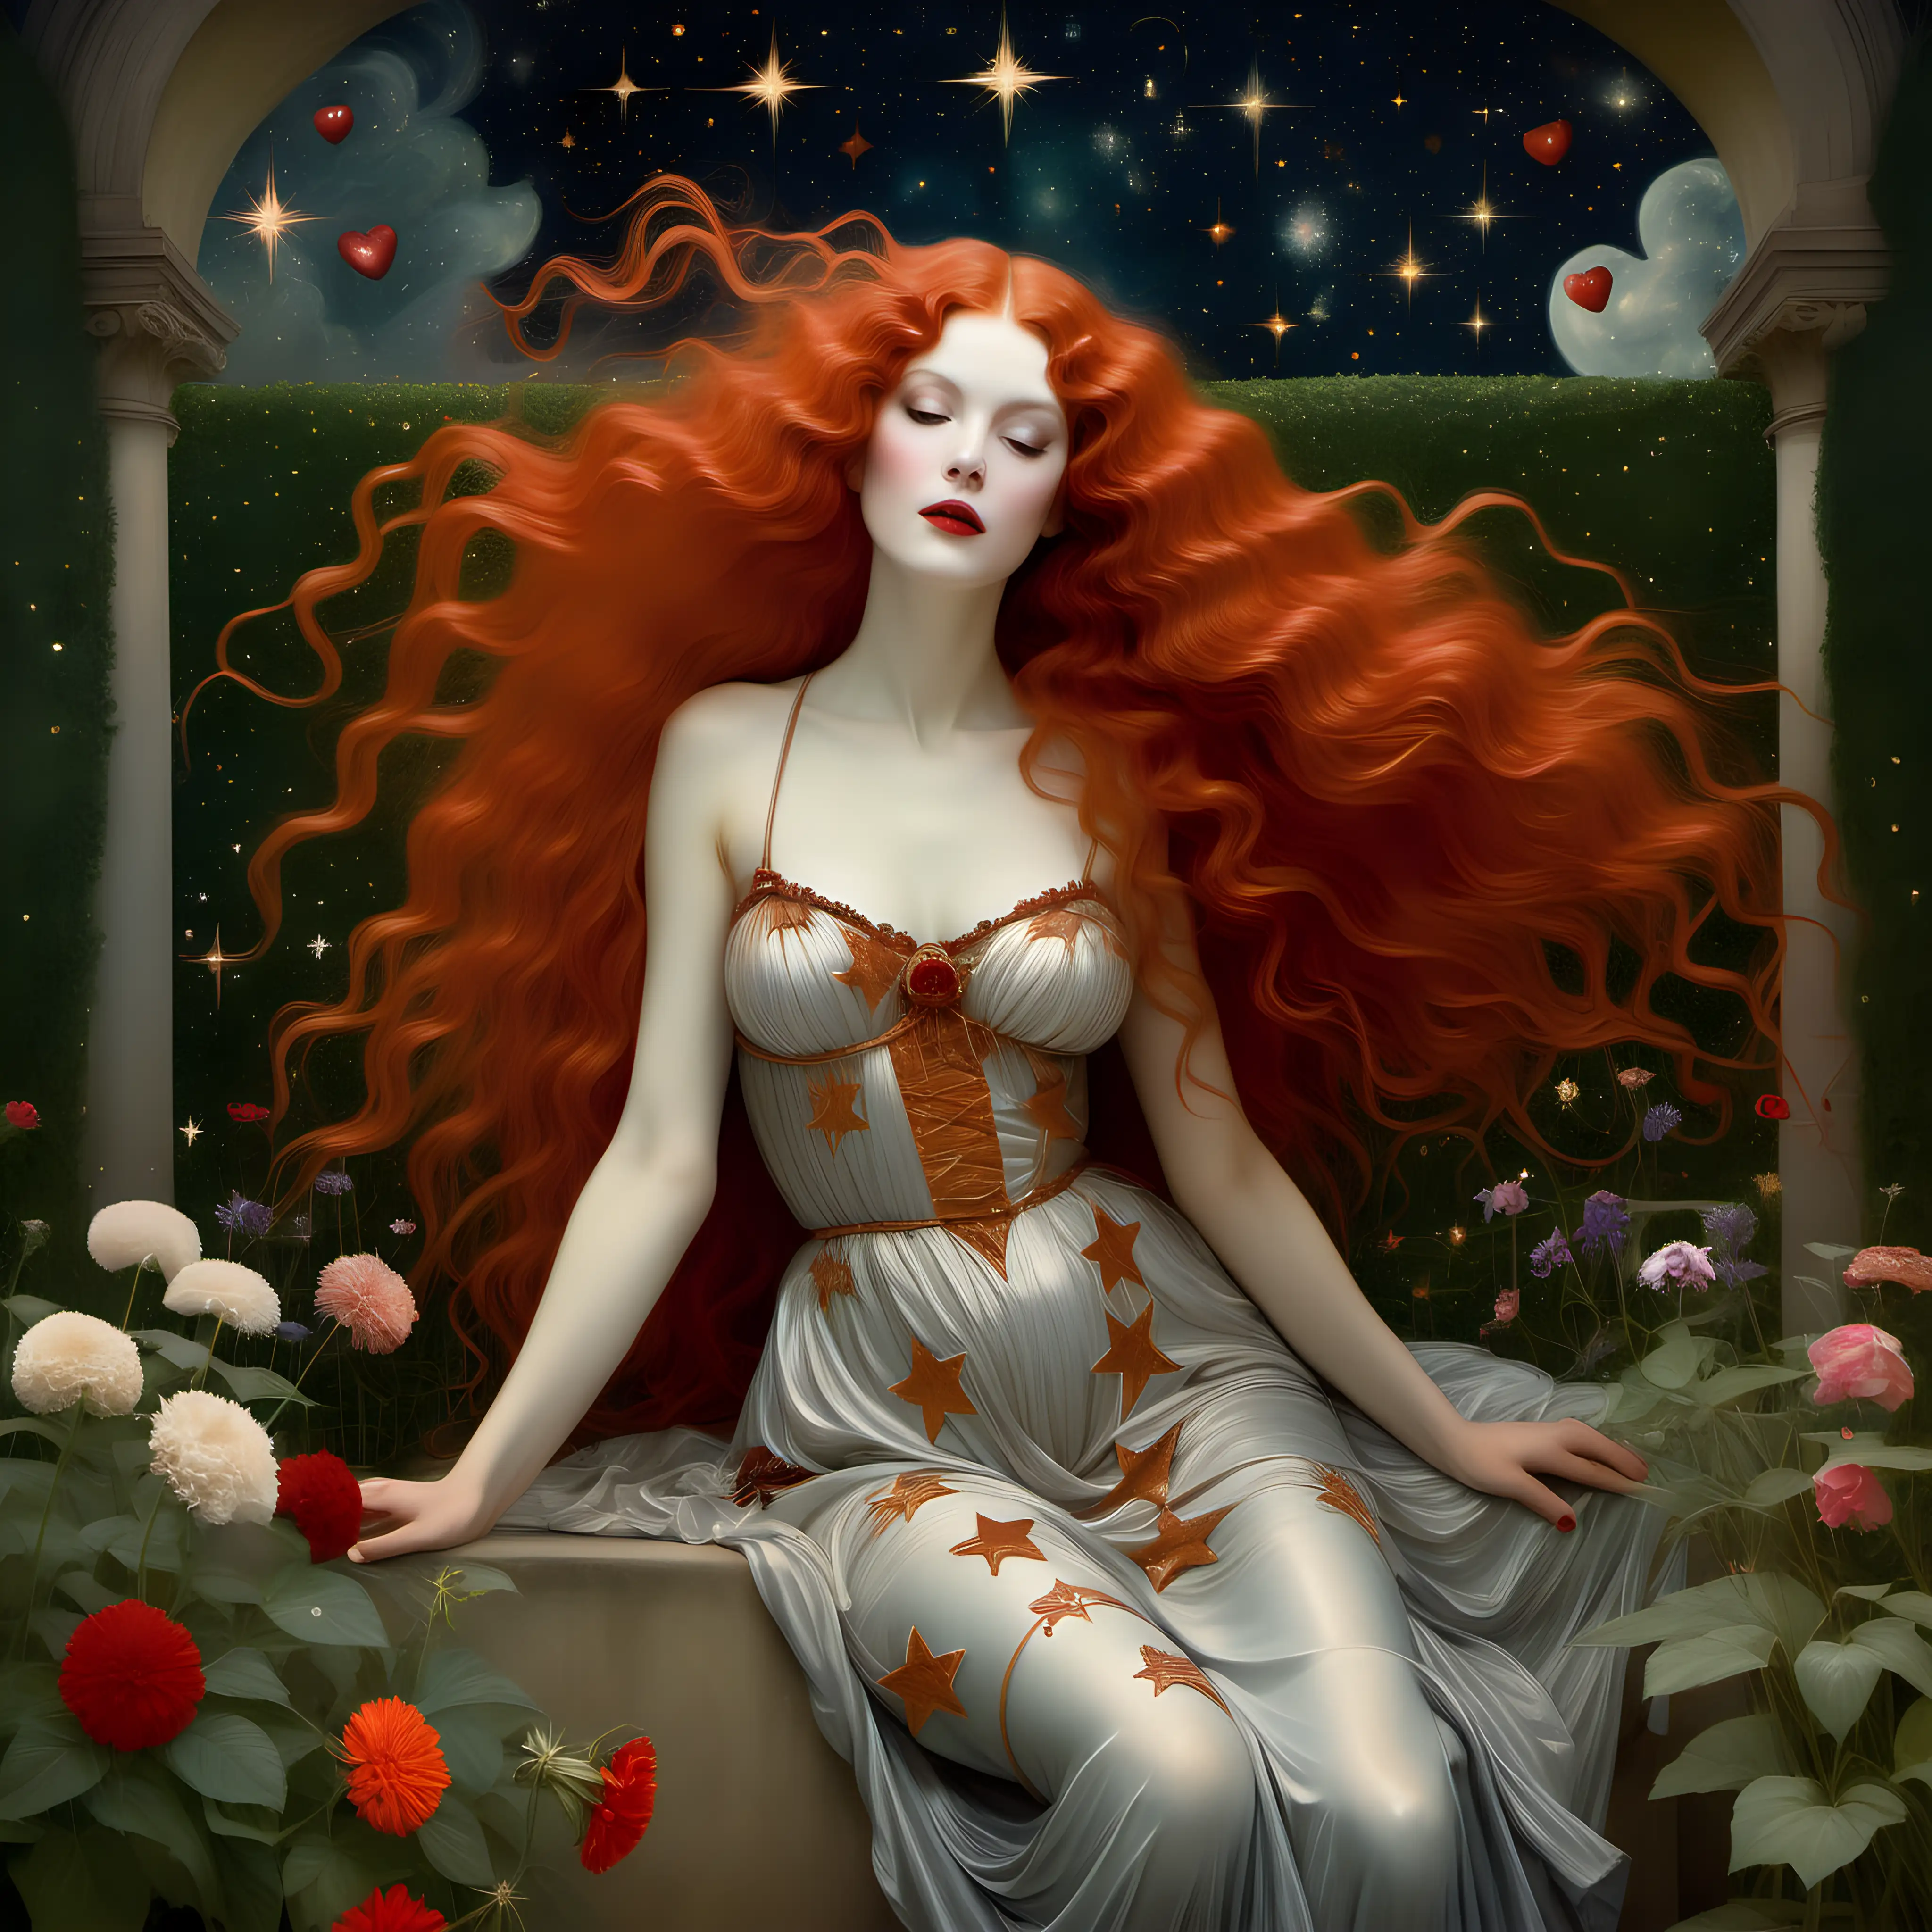 beautiful  woman long red hairs in love  in a garden with flowers and stars, Luis ricardo Falero, Leonor Fini,  Gustave Klimt style 
